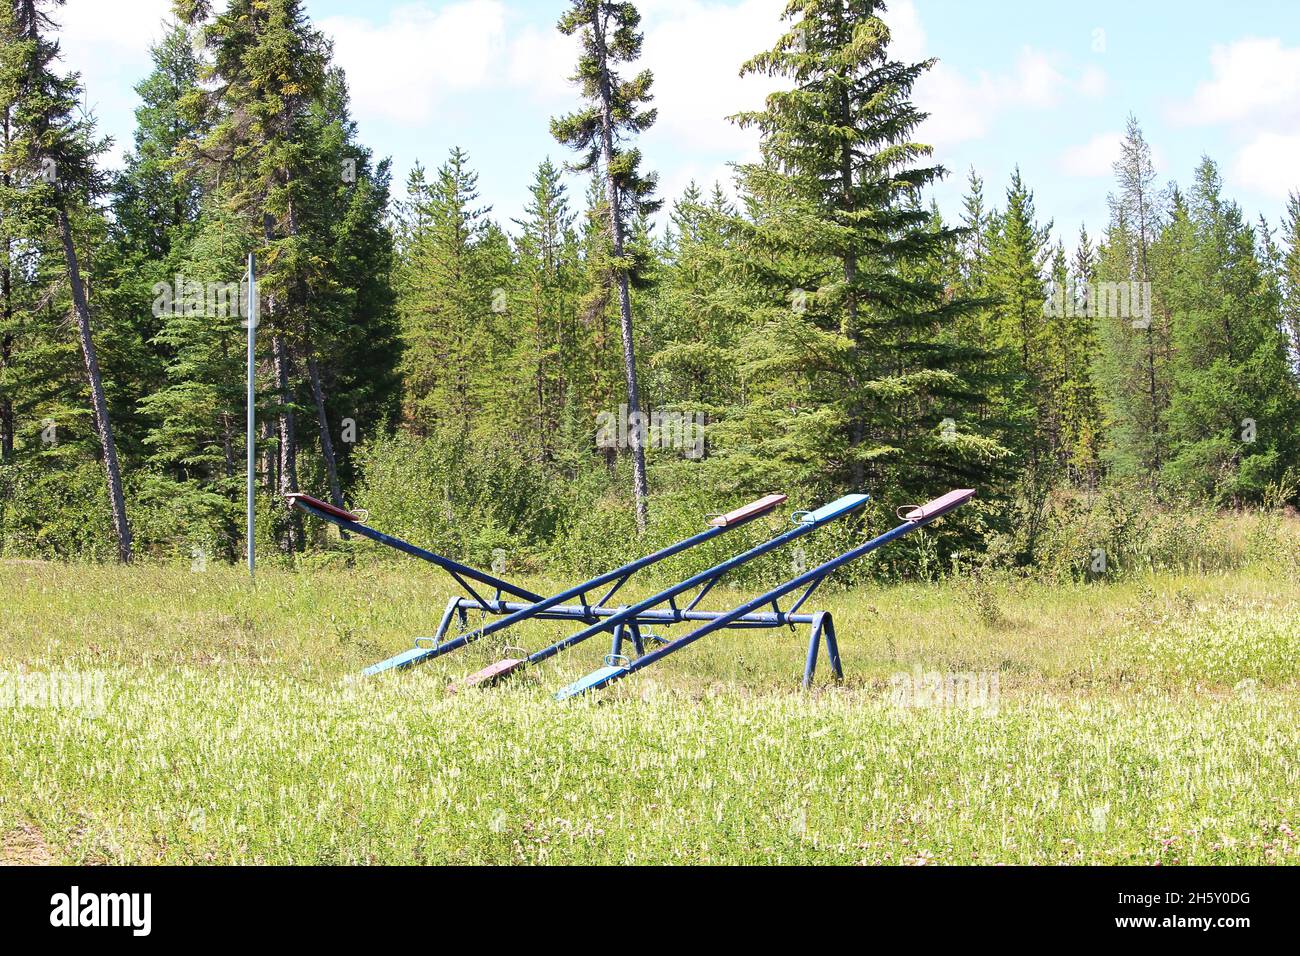 An old teeter totter sits alone in a field Stock Photo